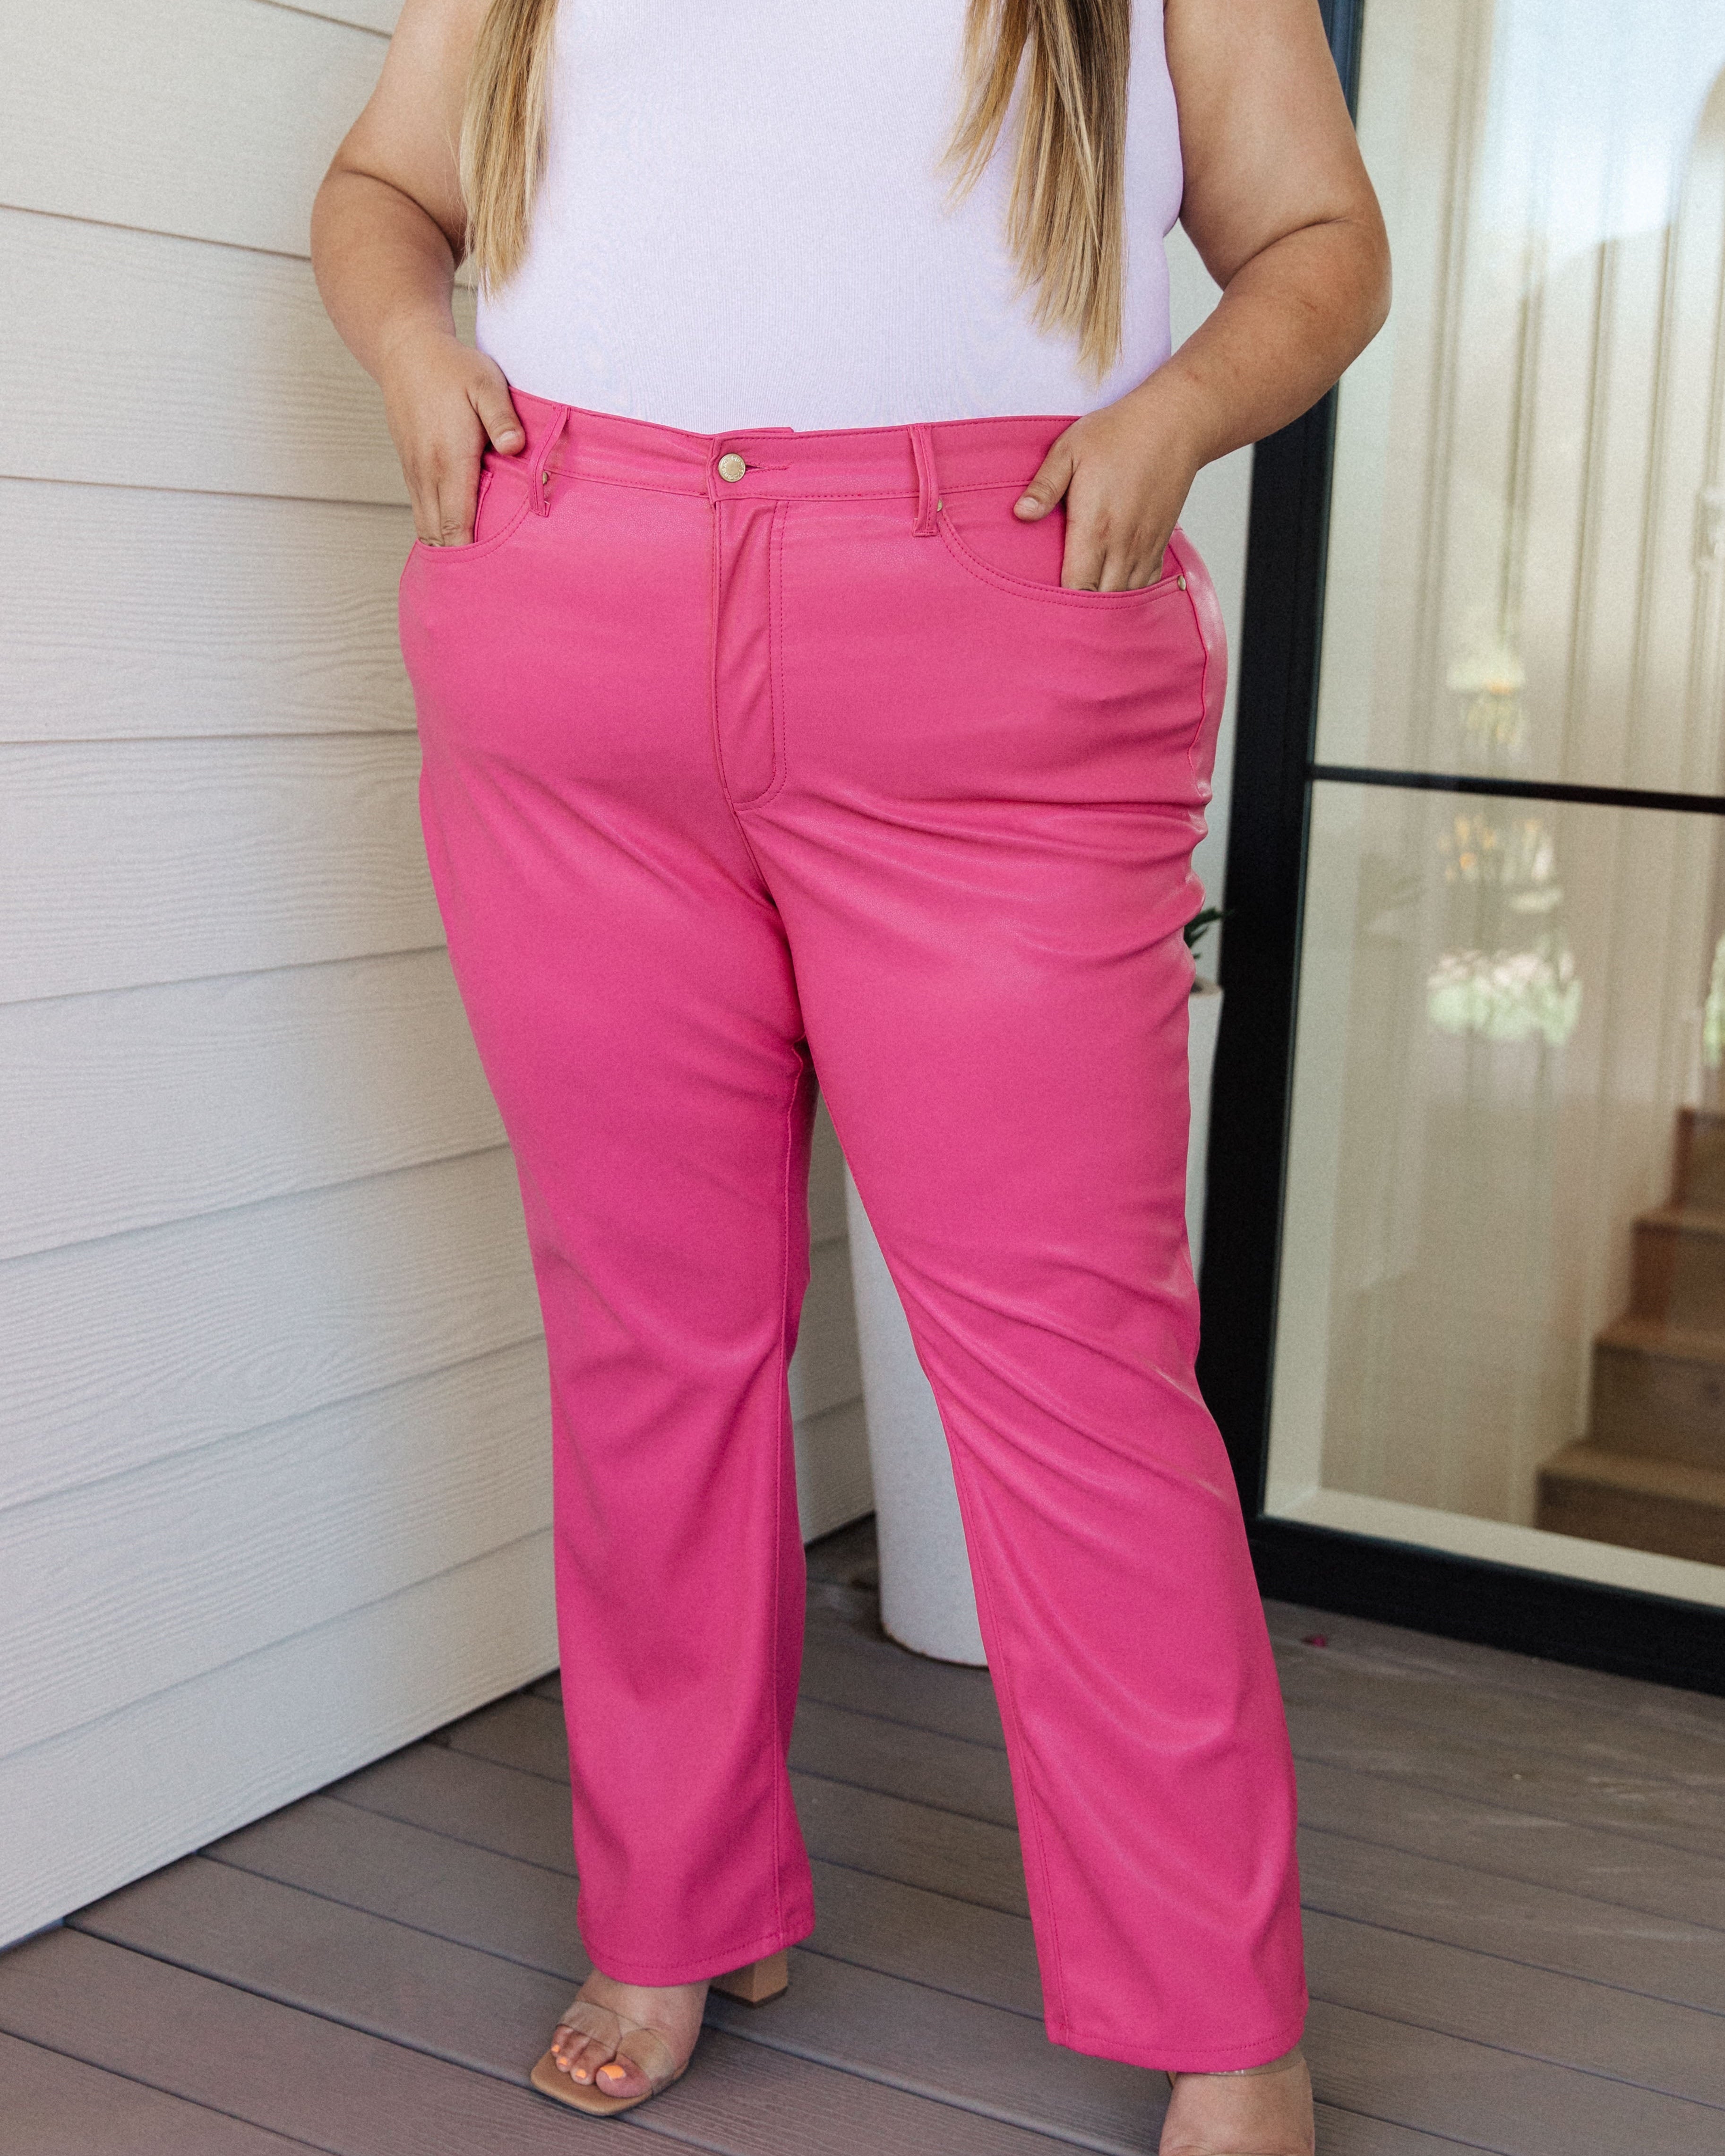 Tanya Control Top Faux Leather Pants in Hot Pink |   |  Casual Chic Boutique